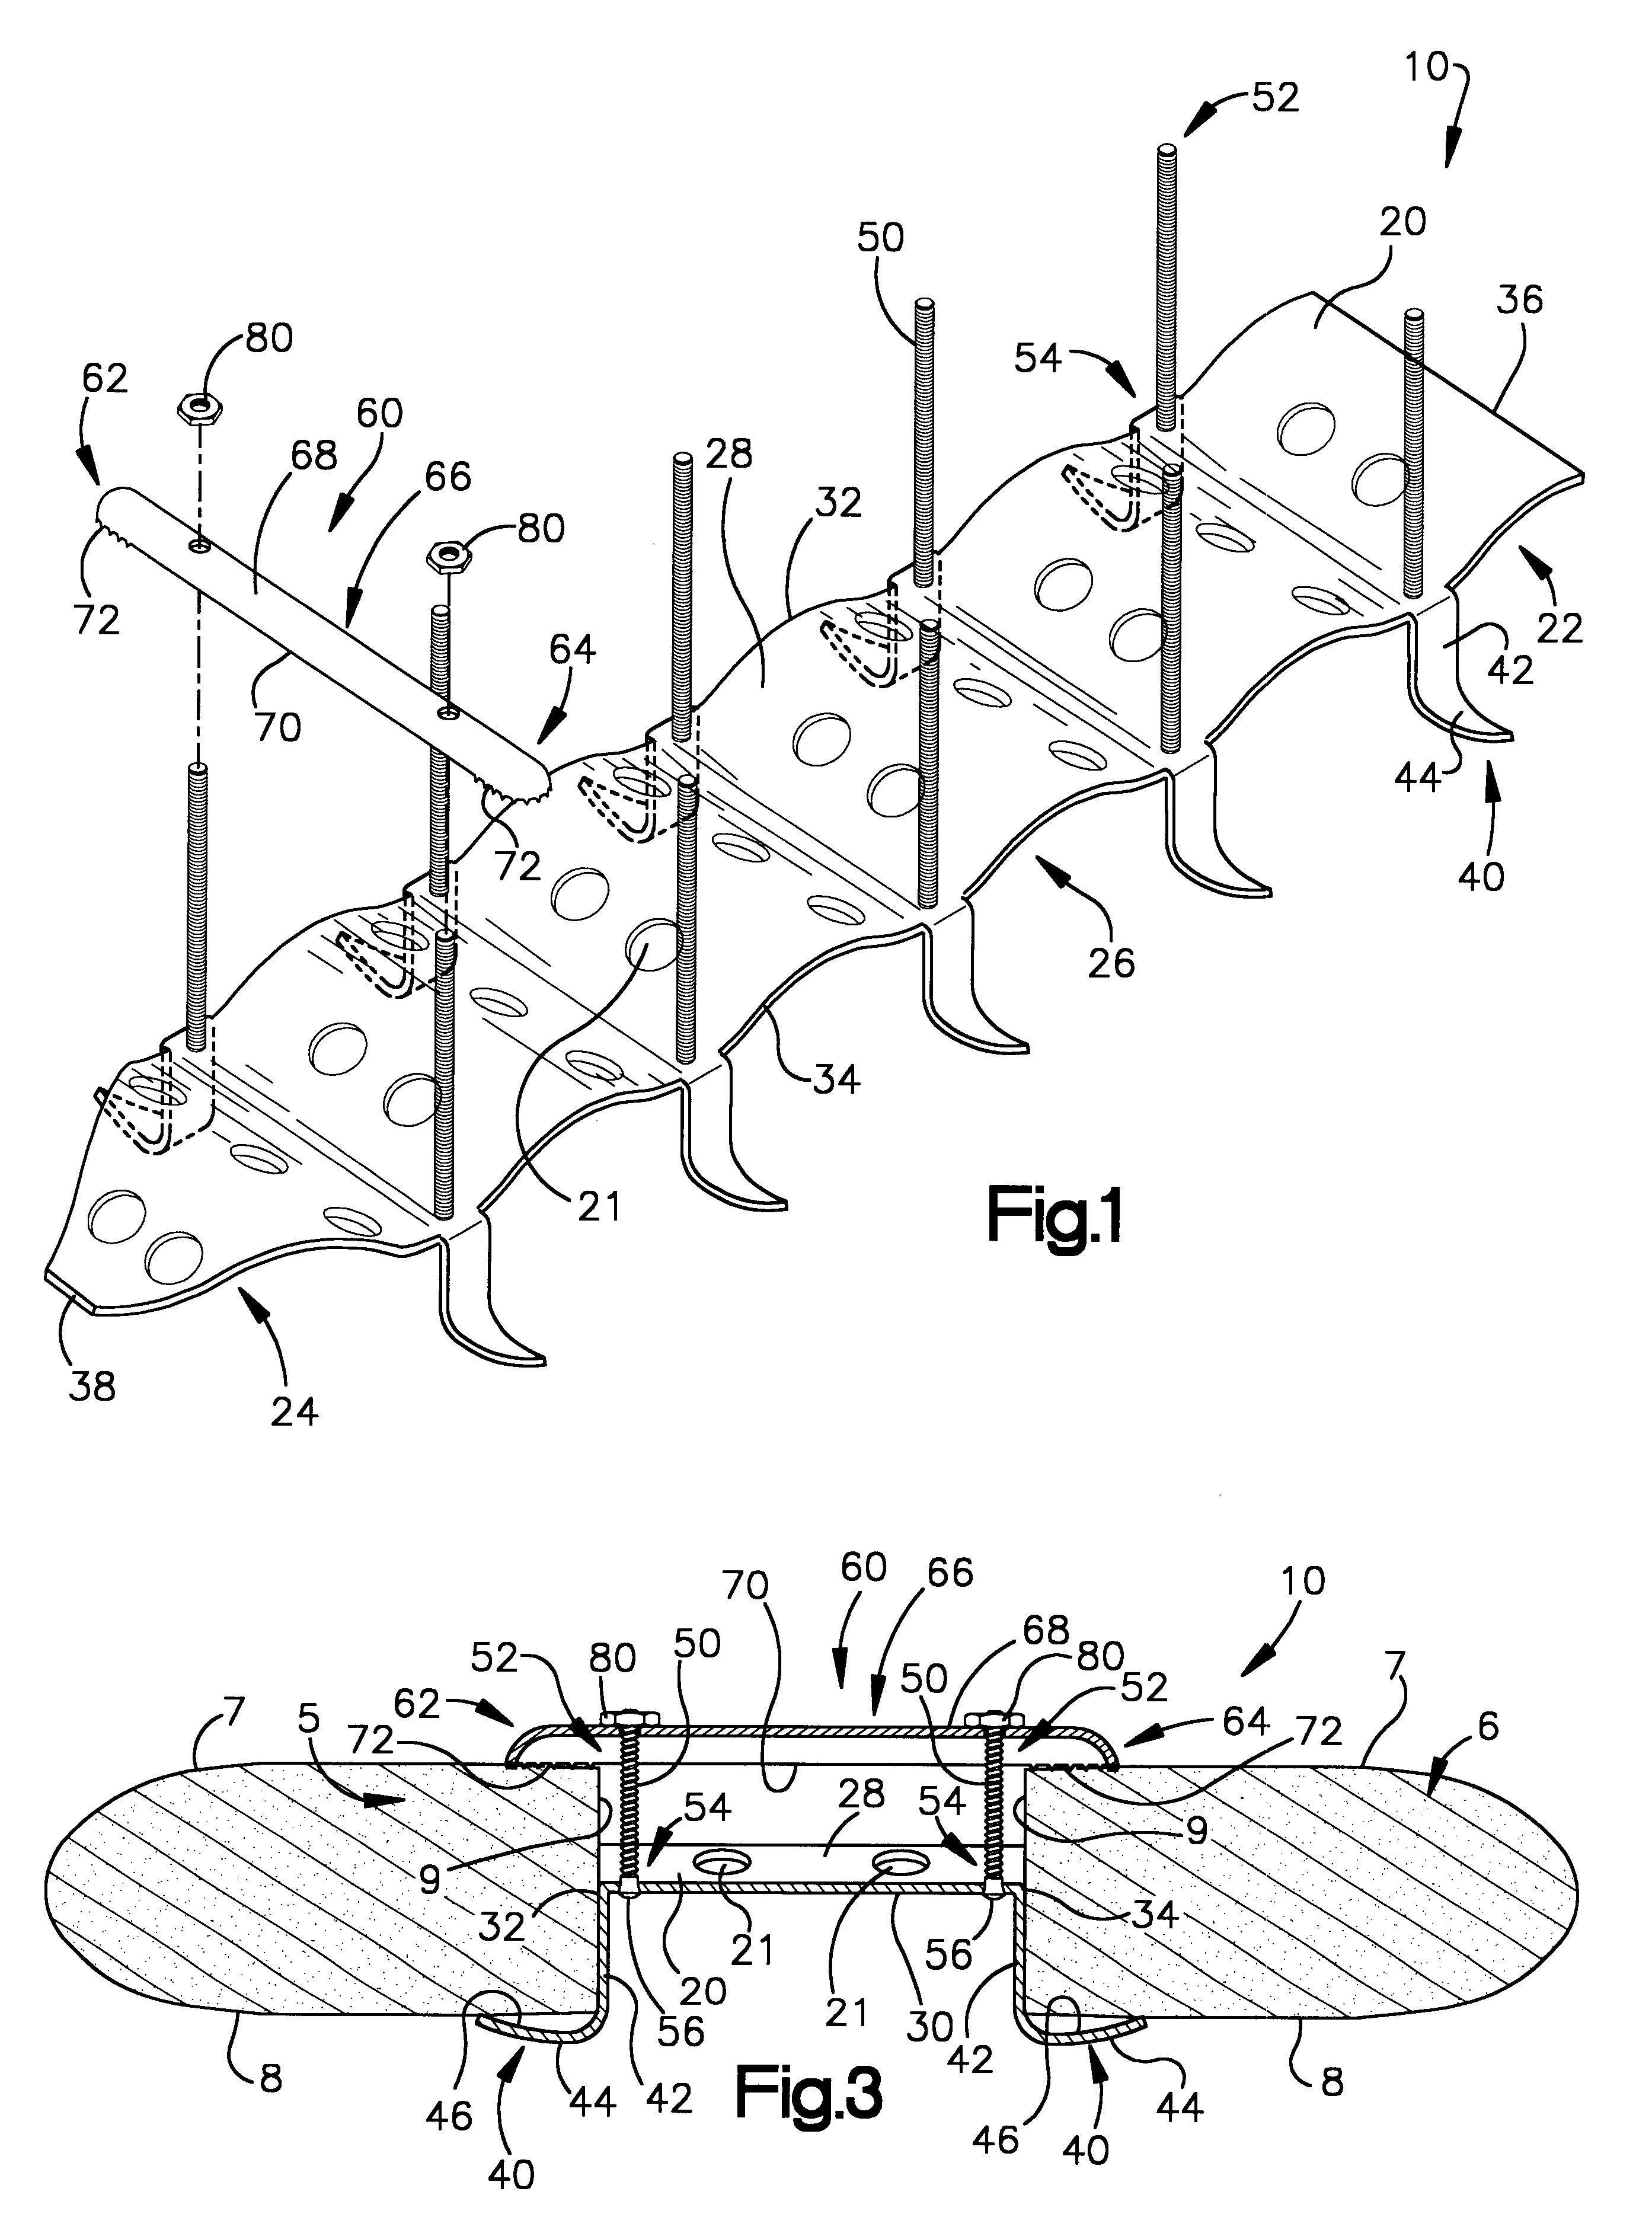 Sternum closure apparatus and method for helping maintain a space between parts of the sternum